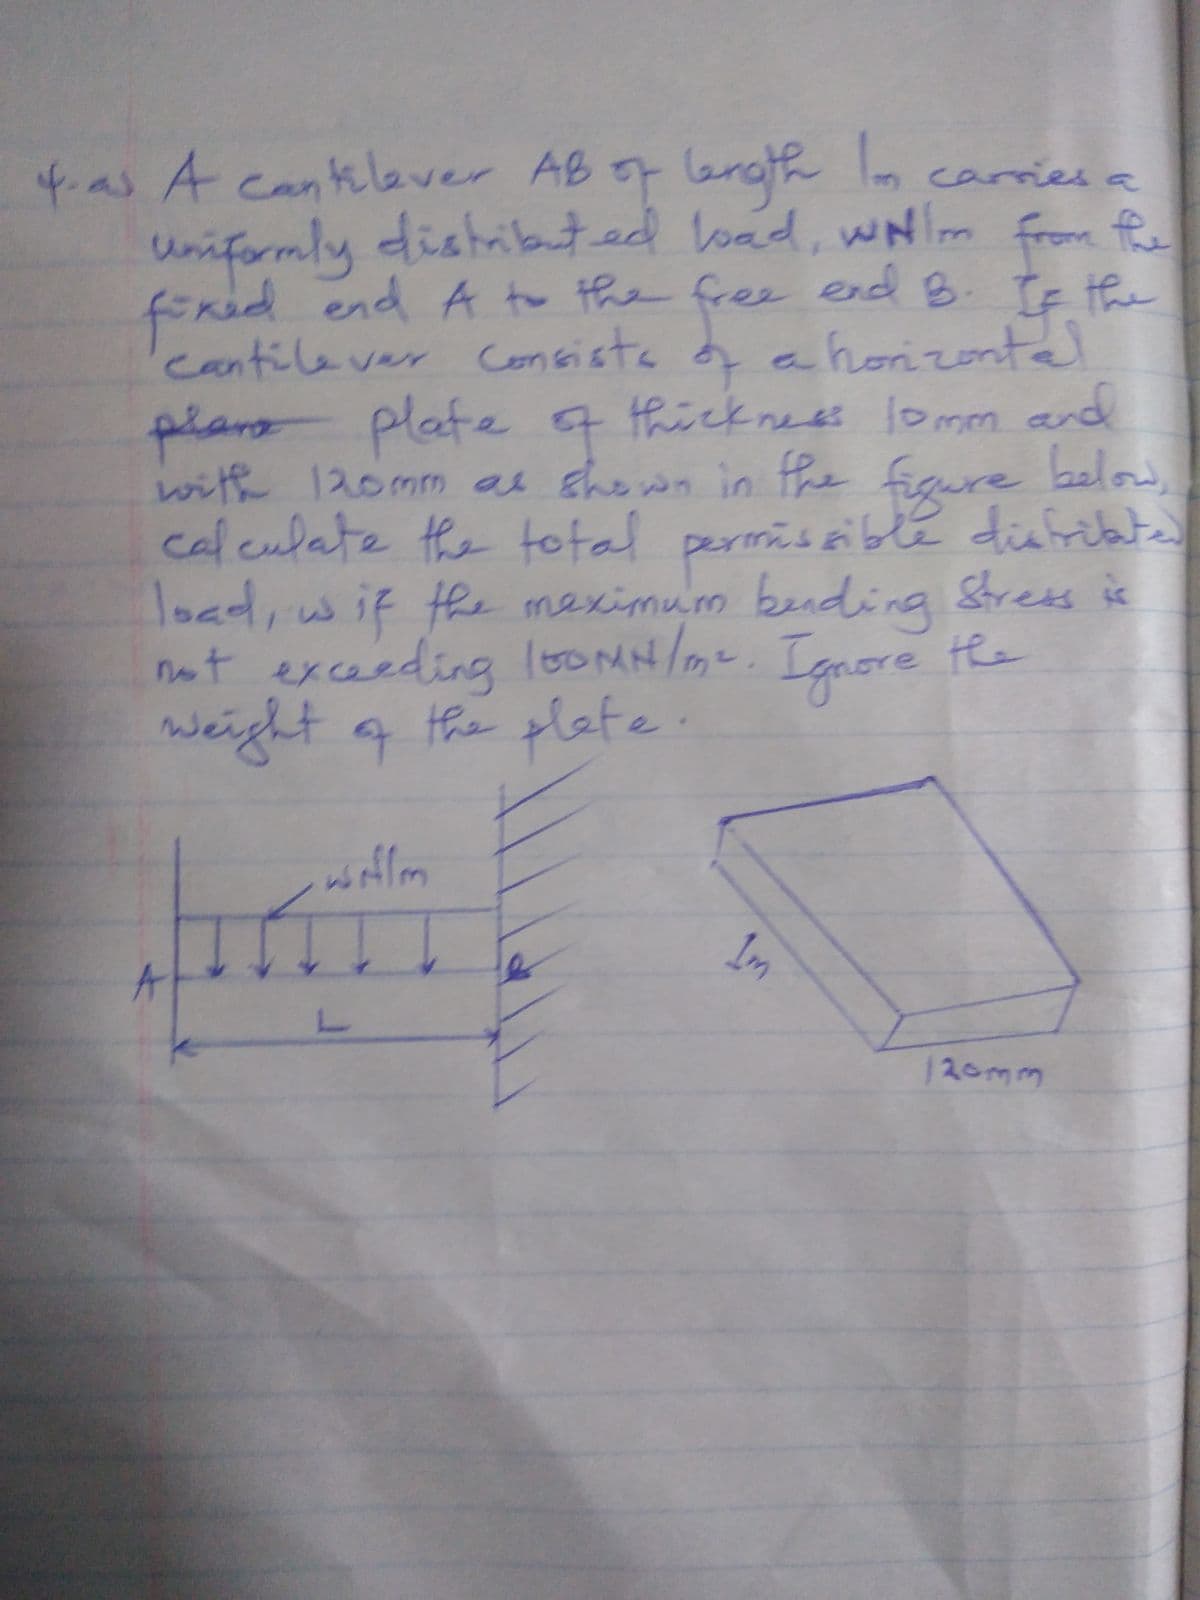 Grath
fas A cantlever AB o erath lm carries a
from
klev.
uniformly distributed load, wNm fe
fired end A to the free end B. Te the
cantilever Consista a horizontal
thicknees lomm and
with 120mm as shown in fhe below,
plars plate4
figure
calculate the total permiseiblé diafribte
load,wif the meximum bending Stress is
not exceeding 10OMH/mt. Ignore the
grore te
weight a the tlefe
Im
120mm
